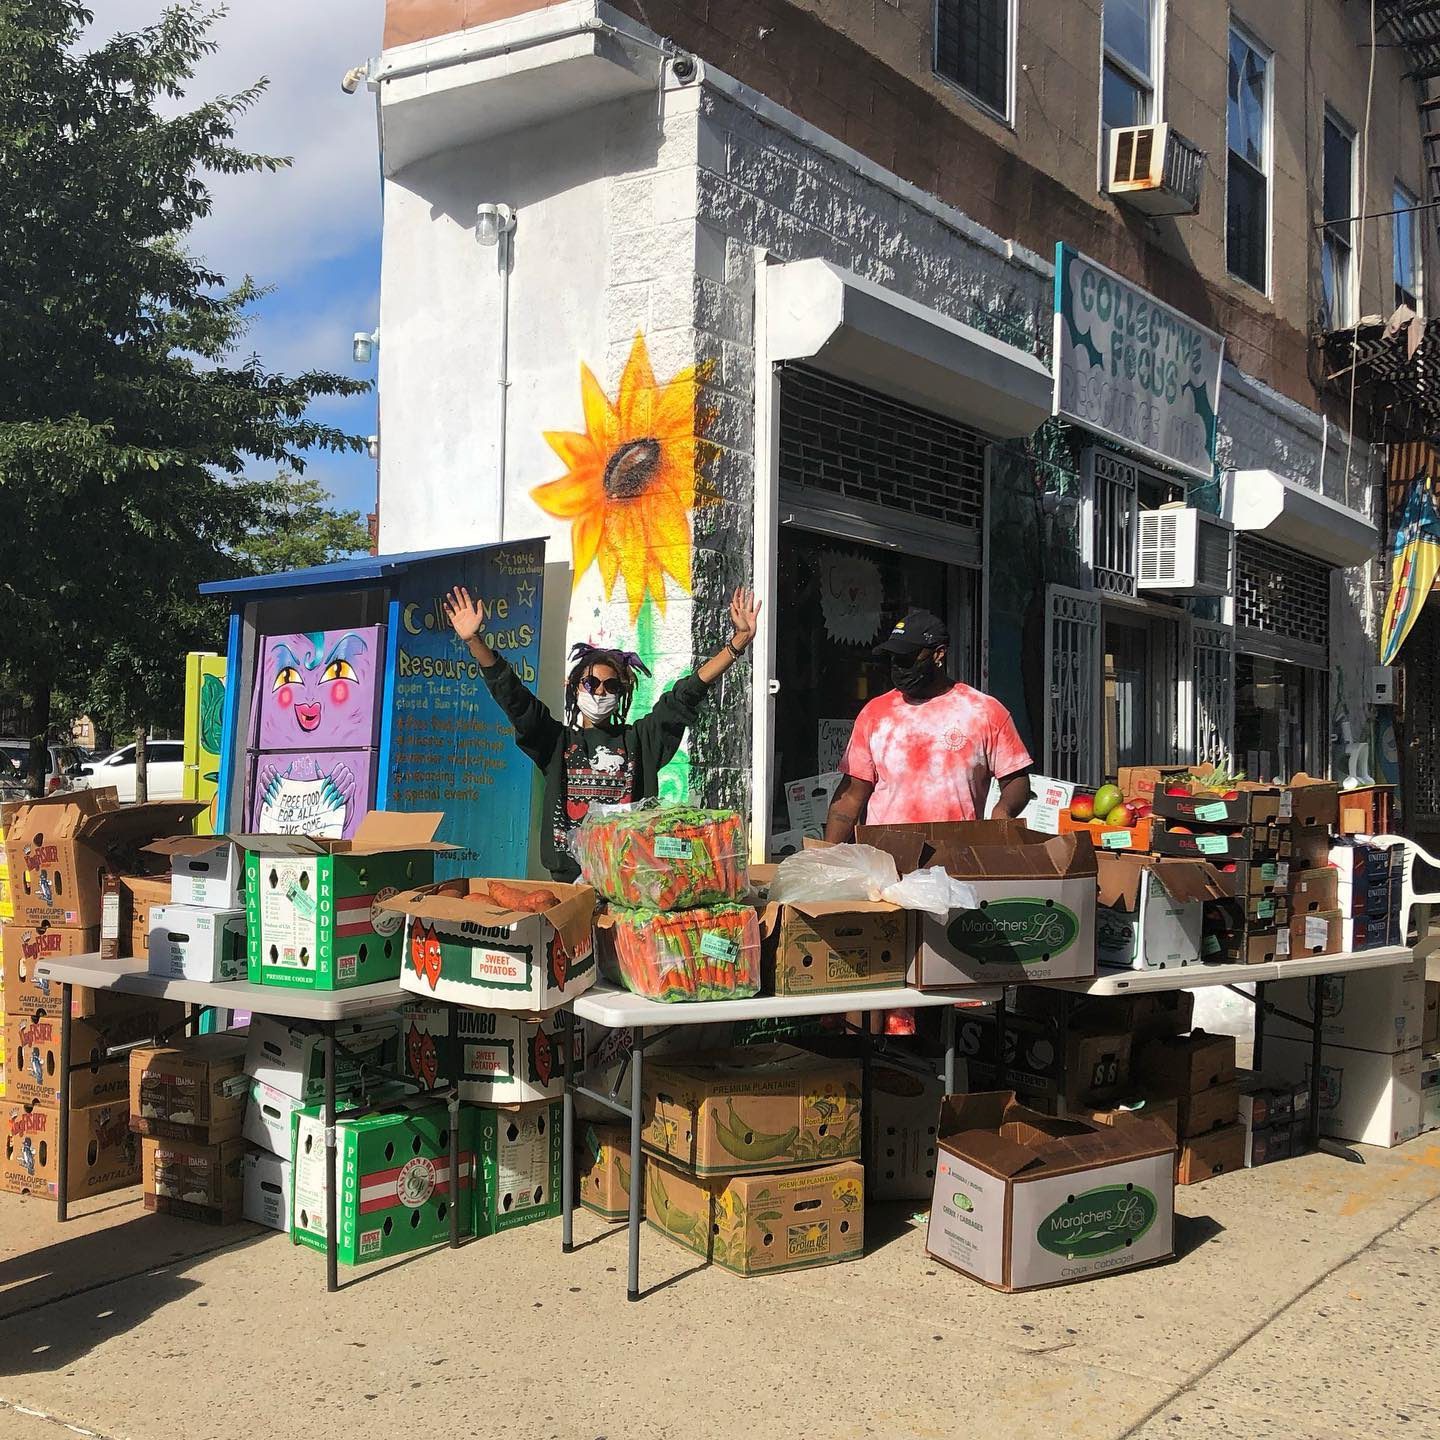 New Center, Collective Focus Hub, Provides Bushwick with Free Food, Goods and Services